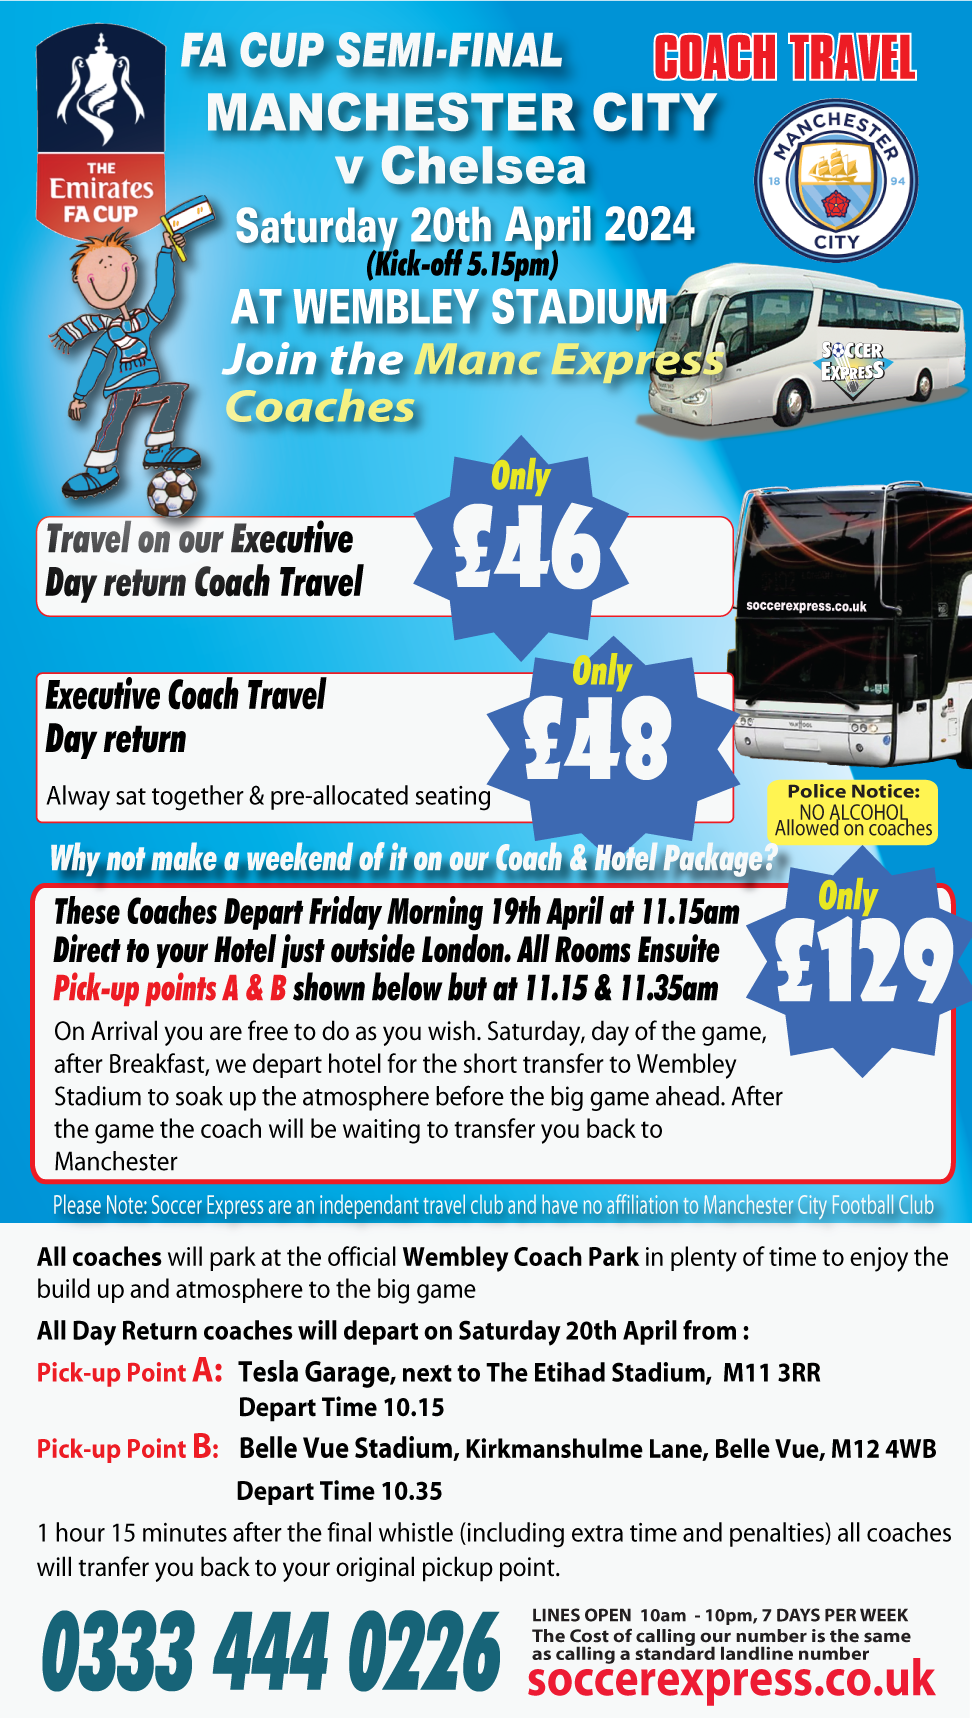 The Emirates FA Cup Semi-Final Coach Travel. Manchester City vs Chelsea, Saturday 2th Apeil 2024 (kick-off 3.15pm) at Wembley Stadium. Join the Manc Express Coaches. Travel on our Executive Day return Coach Travel only £46. Executive coach travel Day return . Always sat together & pre-allocated seating . Only £48 Why not make a weekend of it on our Coach & Hotel Packege? These coaches depart Friday morning 19th April at 11.15am. Direct to your Hotel just outside London. All rooms ensuite. Pick-up points A & B shown below but at 11.15 and 11.35am. On Arrival you are free to do as you wish
Saturday Day of the game  after Breakfast we depart hotel for the short transfer to Wembley Stadium 
to soak up the atmosphere before the big game ahead. After the game the coach will be waiting to transfer you back to Manchester. Please note.  Soccer Express are an independent travel club and have np affiliation to Manchester City Football Club.
All coaches will park at the official Wembley Coach Park in plenty of time to enjoy the build up and atmosphere to the big game. All Day Return coaches will depart on Saturday 20th April from : Pick-up Point A:   Tesla Garage, next to The Etihad Stadium,  M11 3RR   Depart Time 10.15.  Pick-up Point B:    Belle Vue Stadium, Kirkmanshulme Lane, Belle Vue, M12 4WB.  Depart Time 10.35.  1 hour 15 minutes  (including extra time and penalties) after the final whistle all coaches will tranfer you back to your original pickup point.

 . 
<div class=